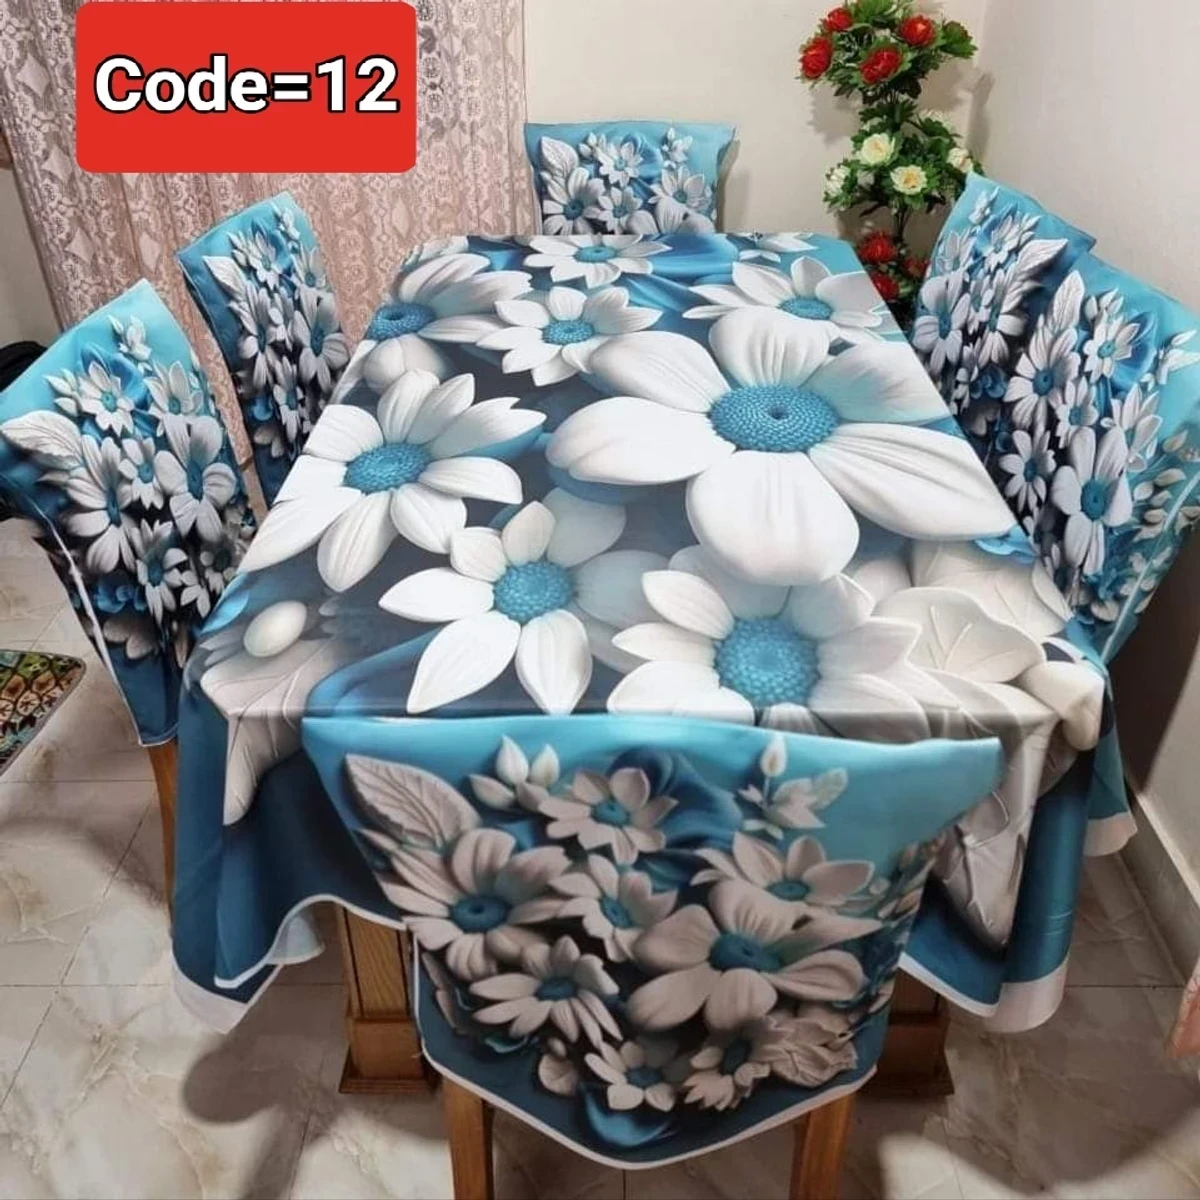 3D Pint Dining table and chair cover code = 12